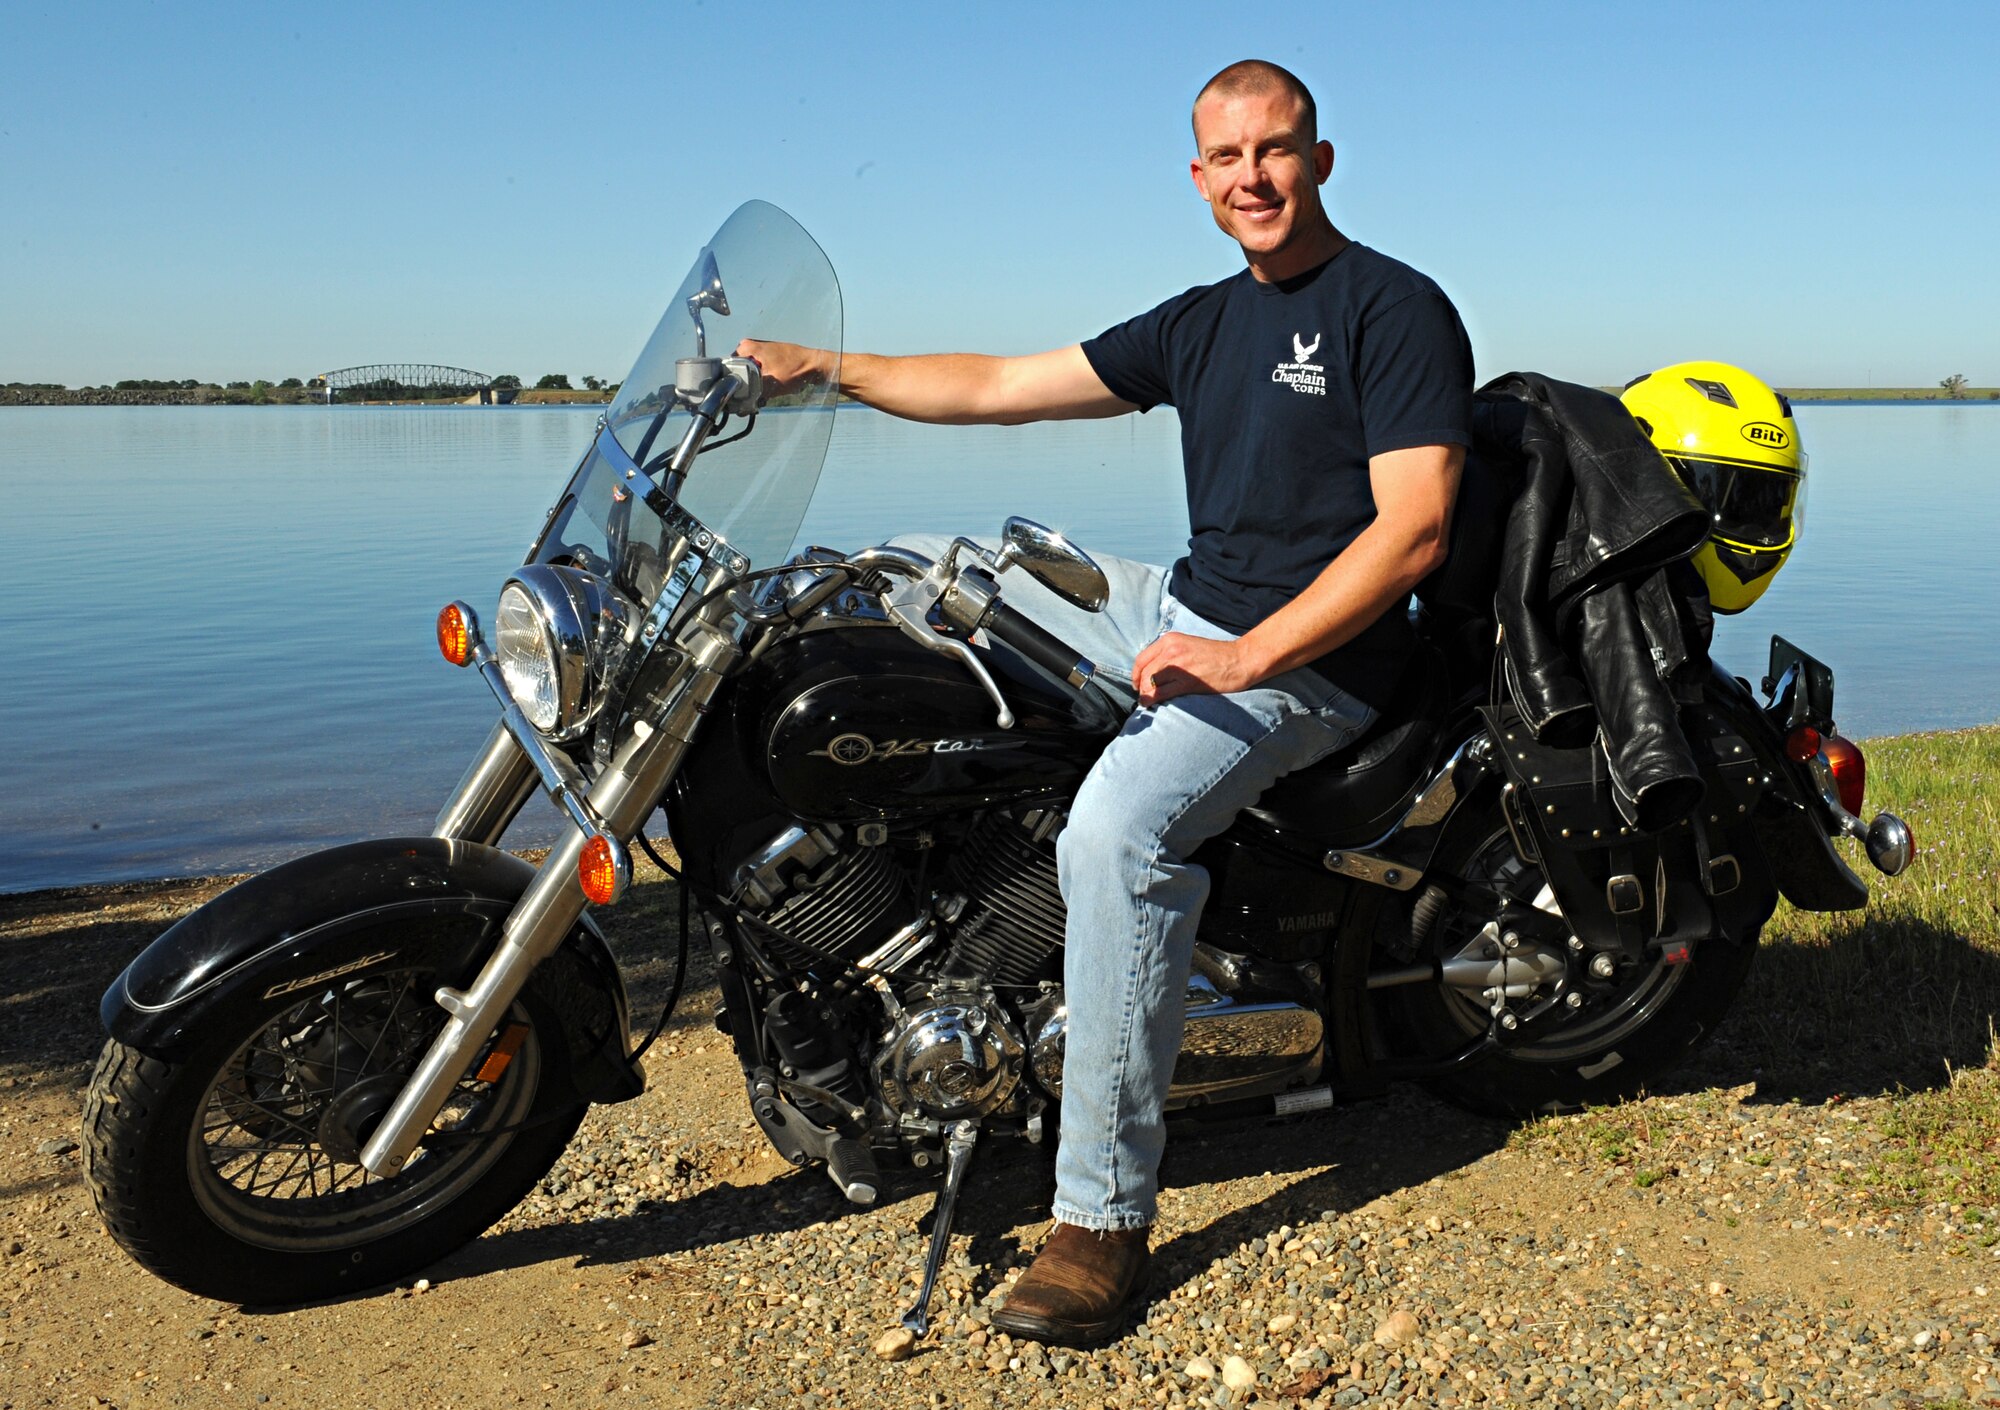 Chaplain (Capt.) R. Brenner Campbell, 9th Reconnaissance Wing chaplain, poses with his motorcycle at Camp Far West Lake in Wheatland, Calif., March 27, 2015. (U.S. Air Force photo by Airman 1st Class Ramon A. Adelan/Released)